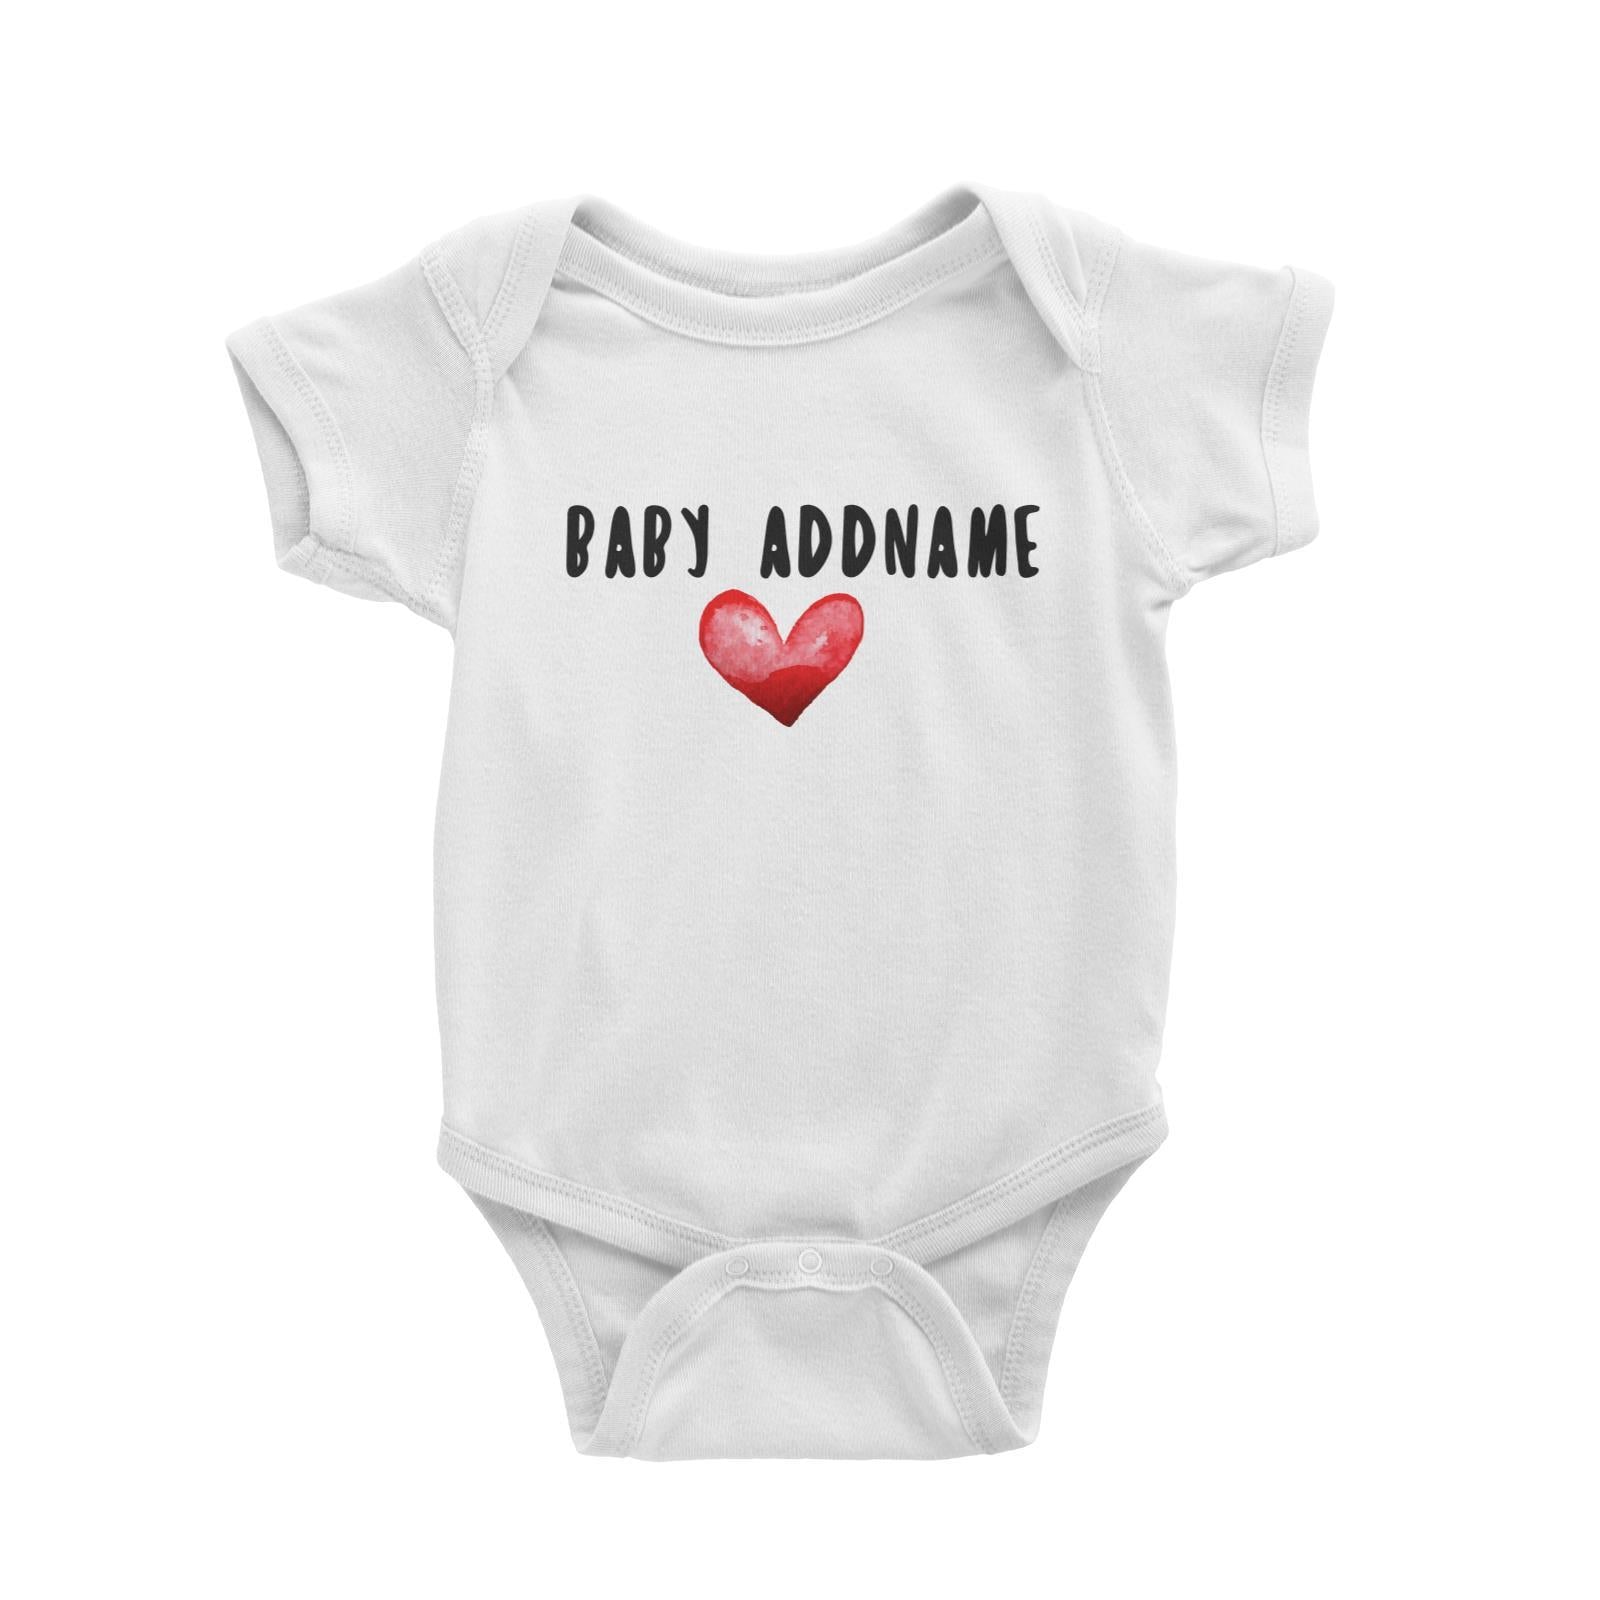 Baby Addname with Big Red Heart Baby Romper Personalizable Designs Basic Newborn